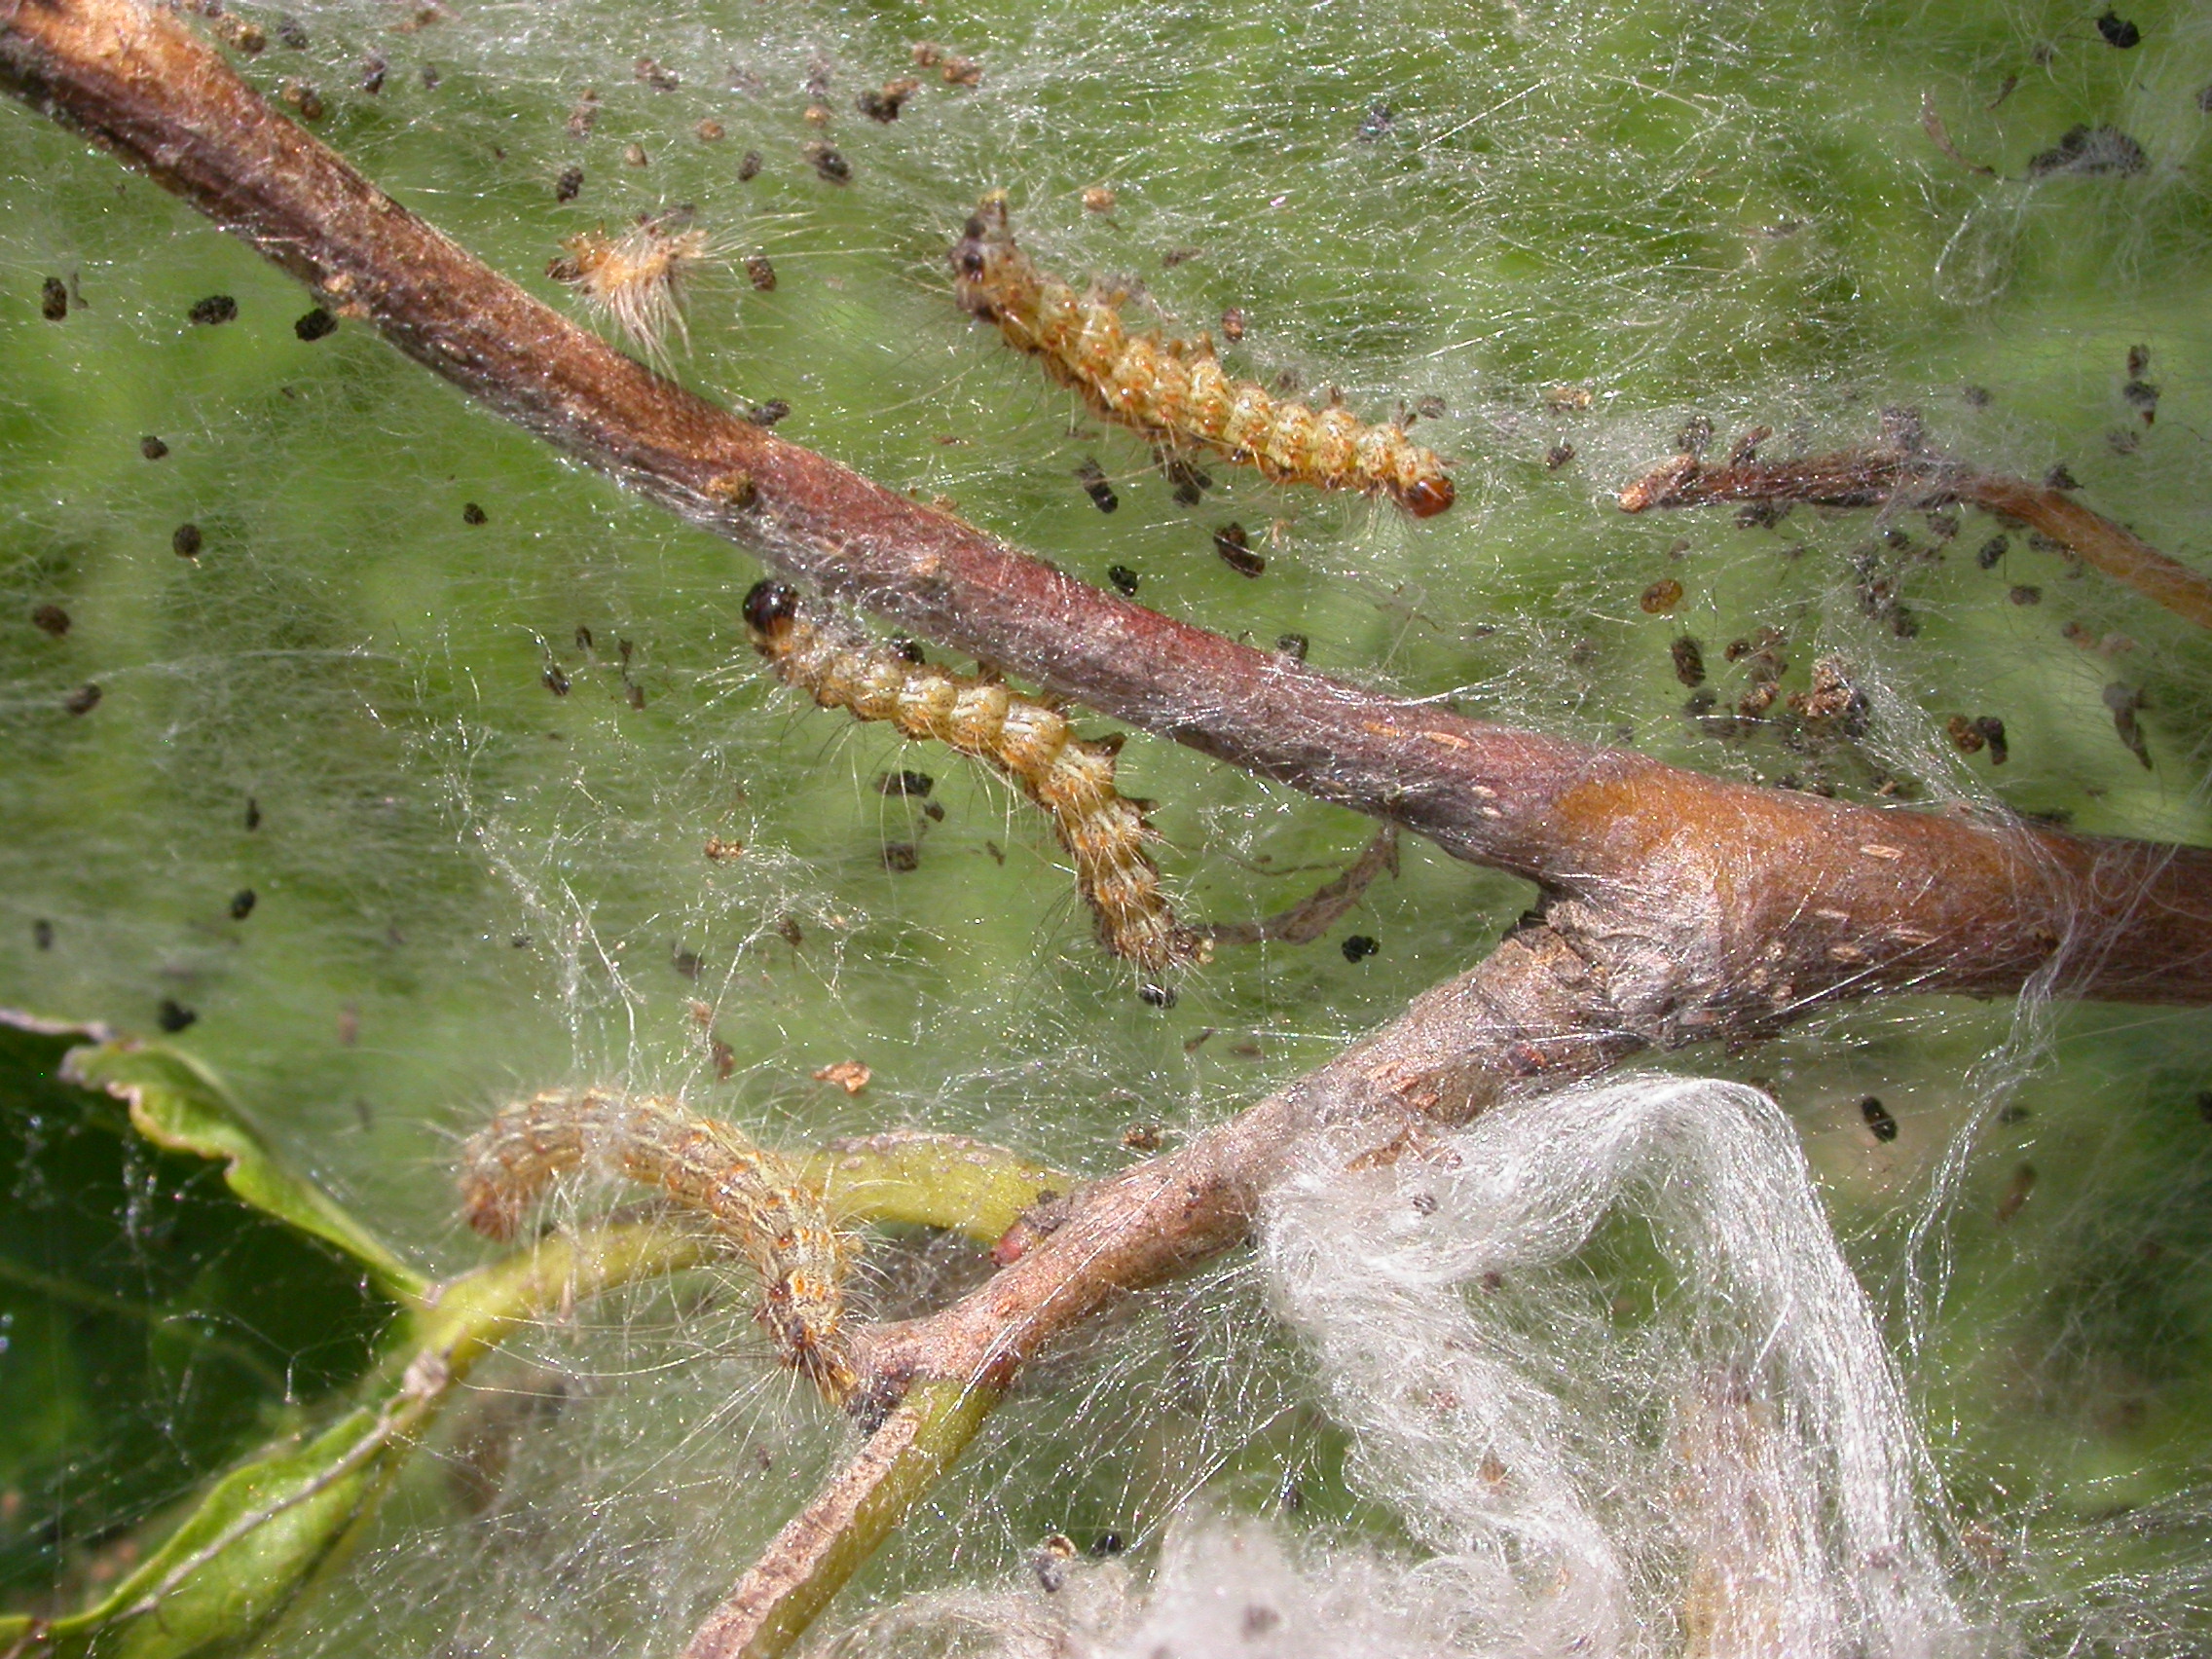 Caterpillars feed on leaves and live inside webs.